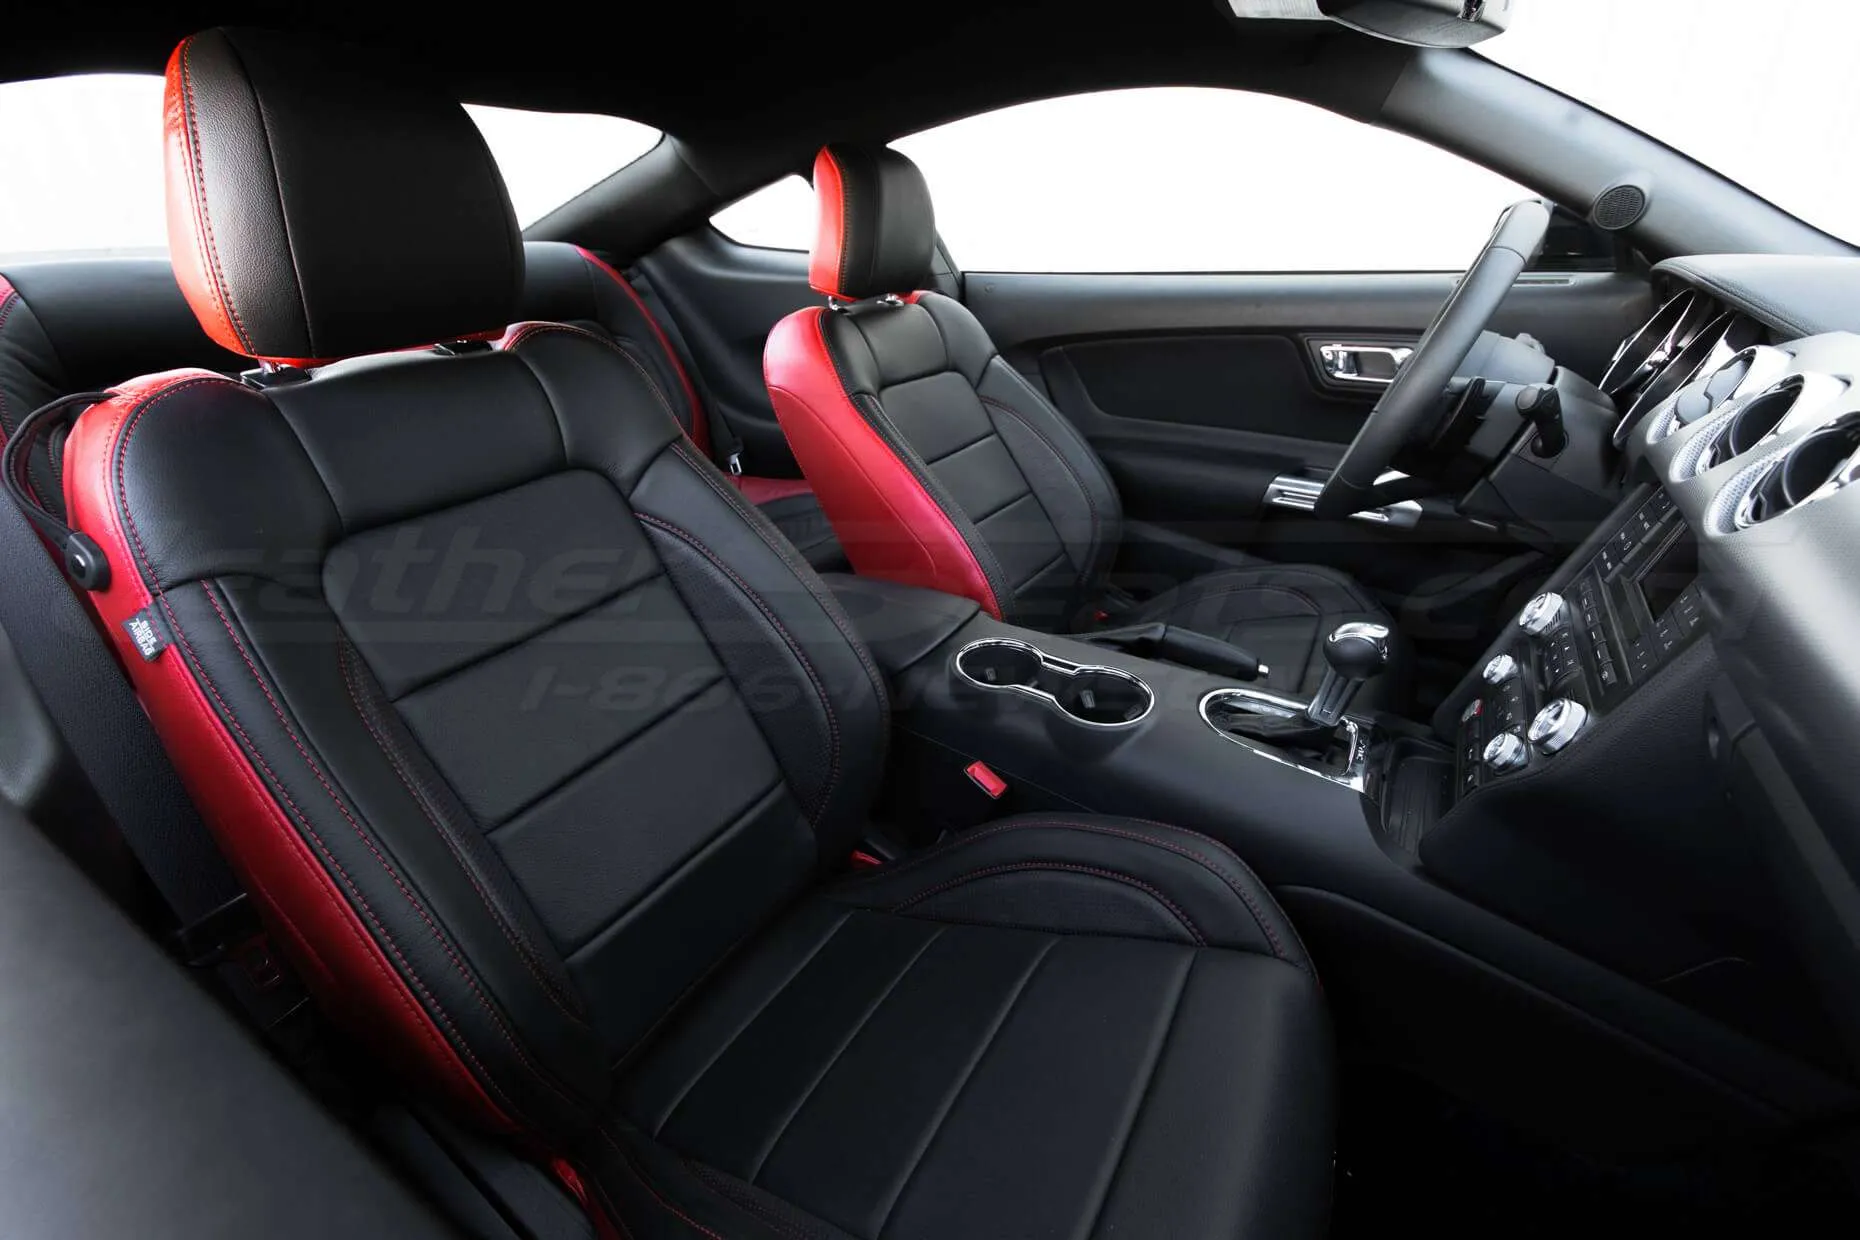 2015-2021 Ford Mustang Leather Upholstery Kit - Black & Bright Red - Installed - Front seat interior